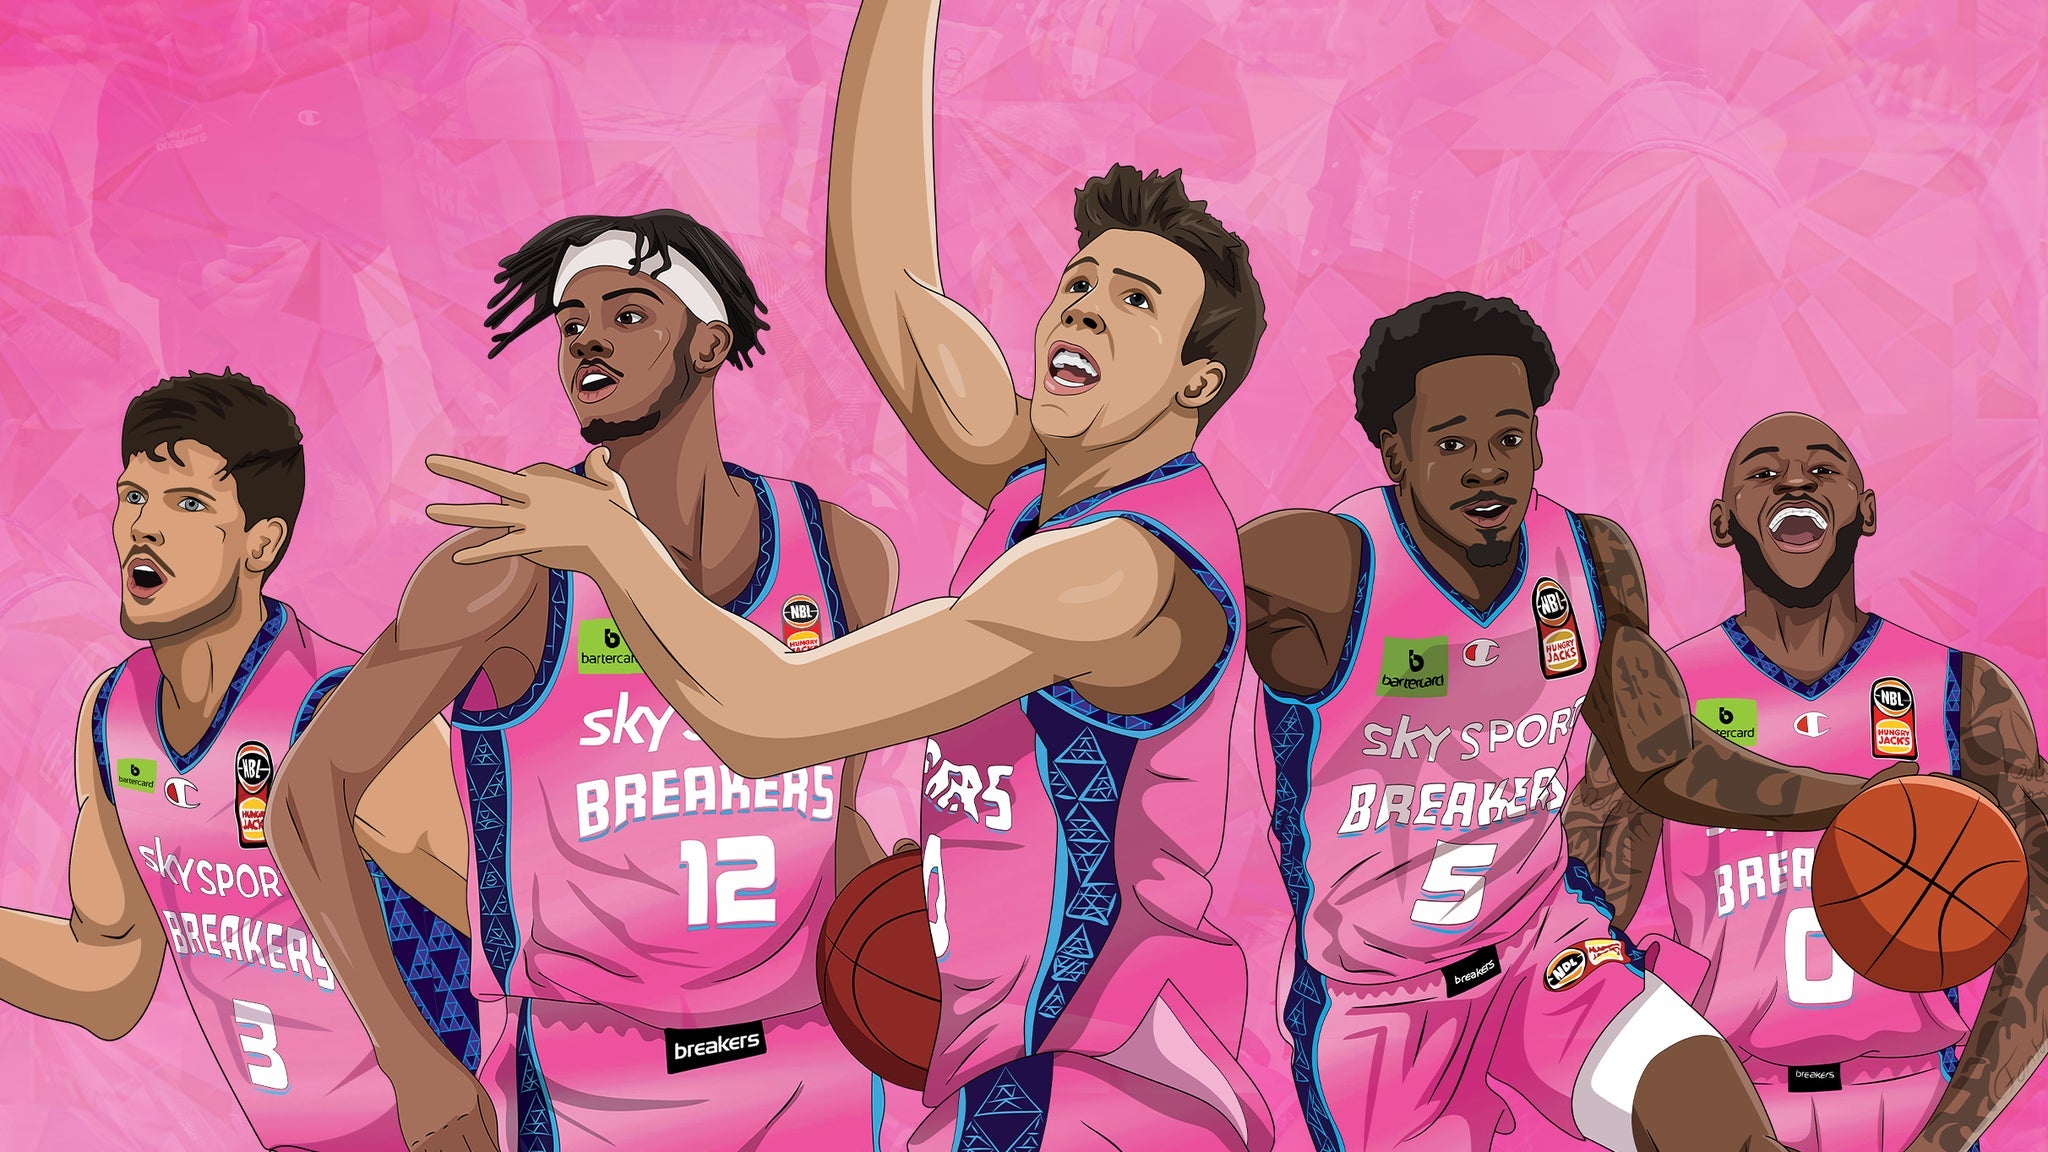 Sky Sport Breakers Playoff - Game 1 in Auckland promo photo for Member presale offer code